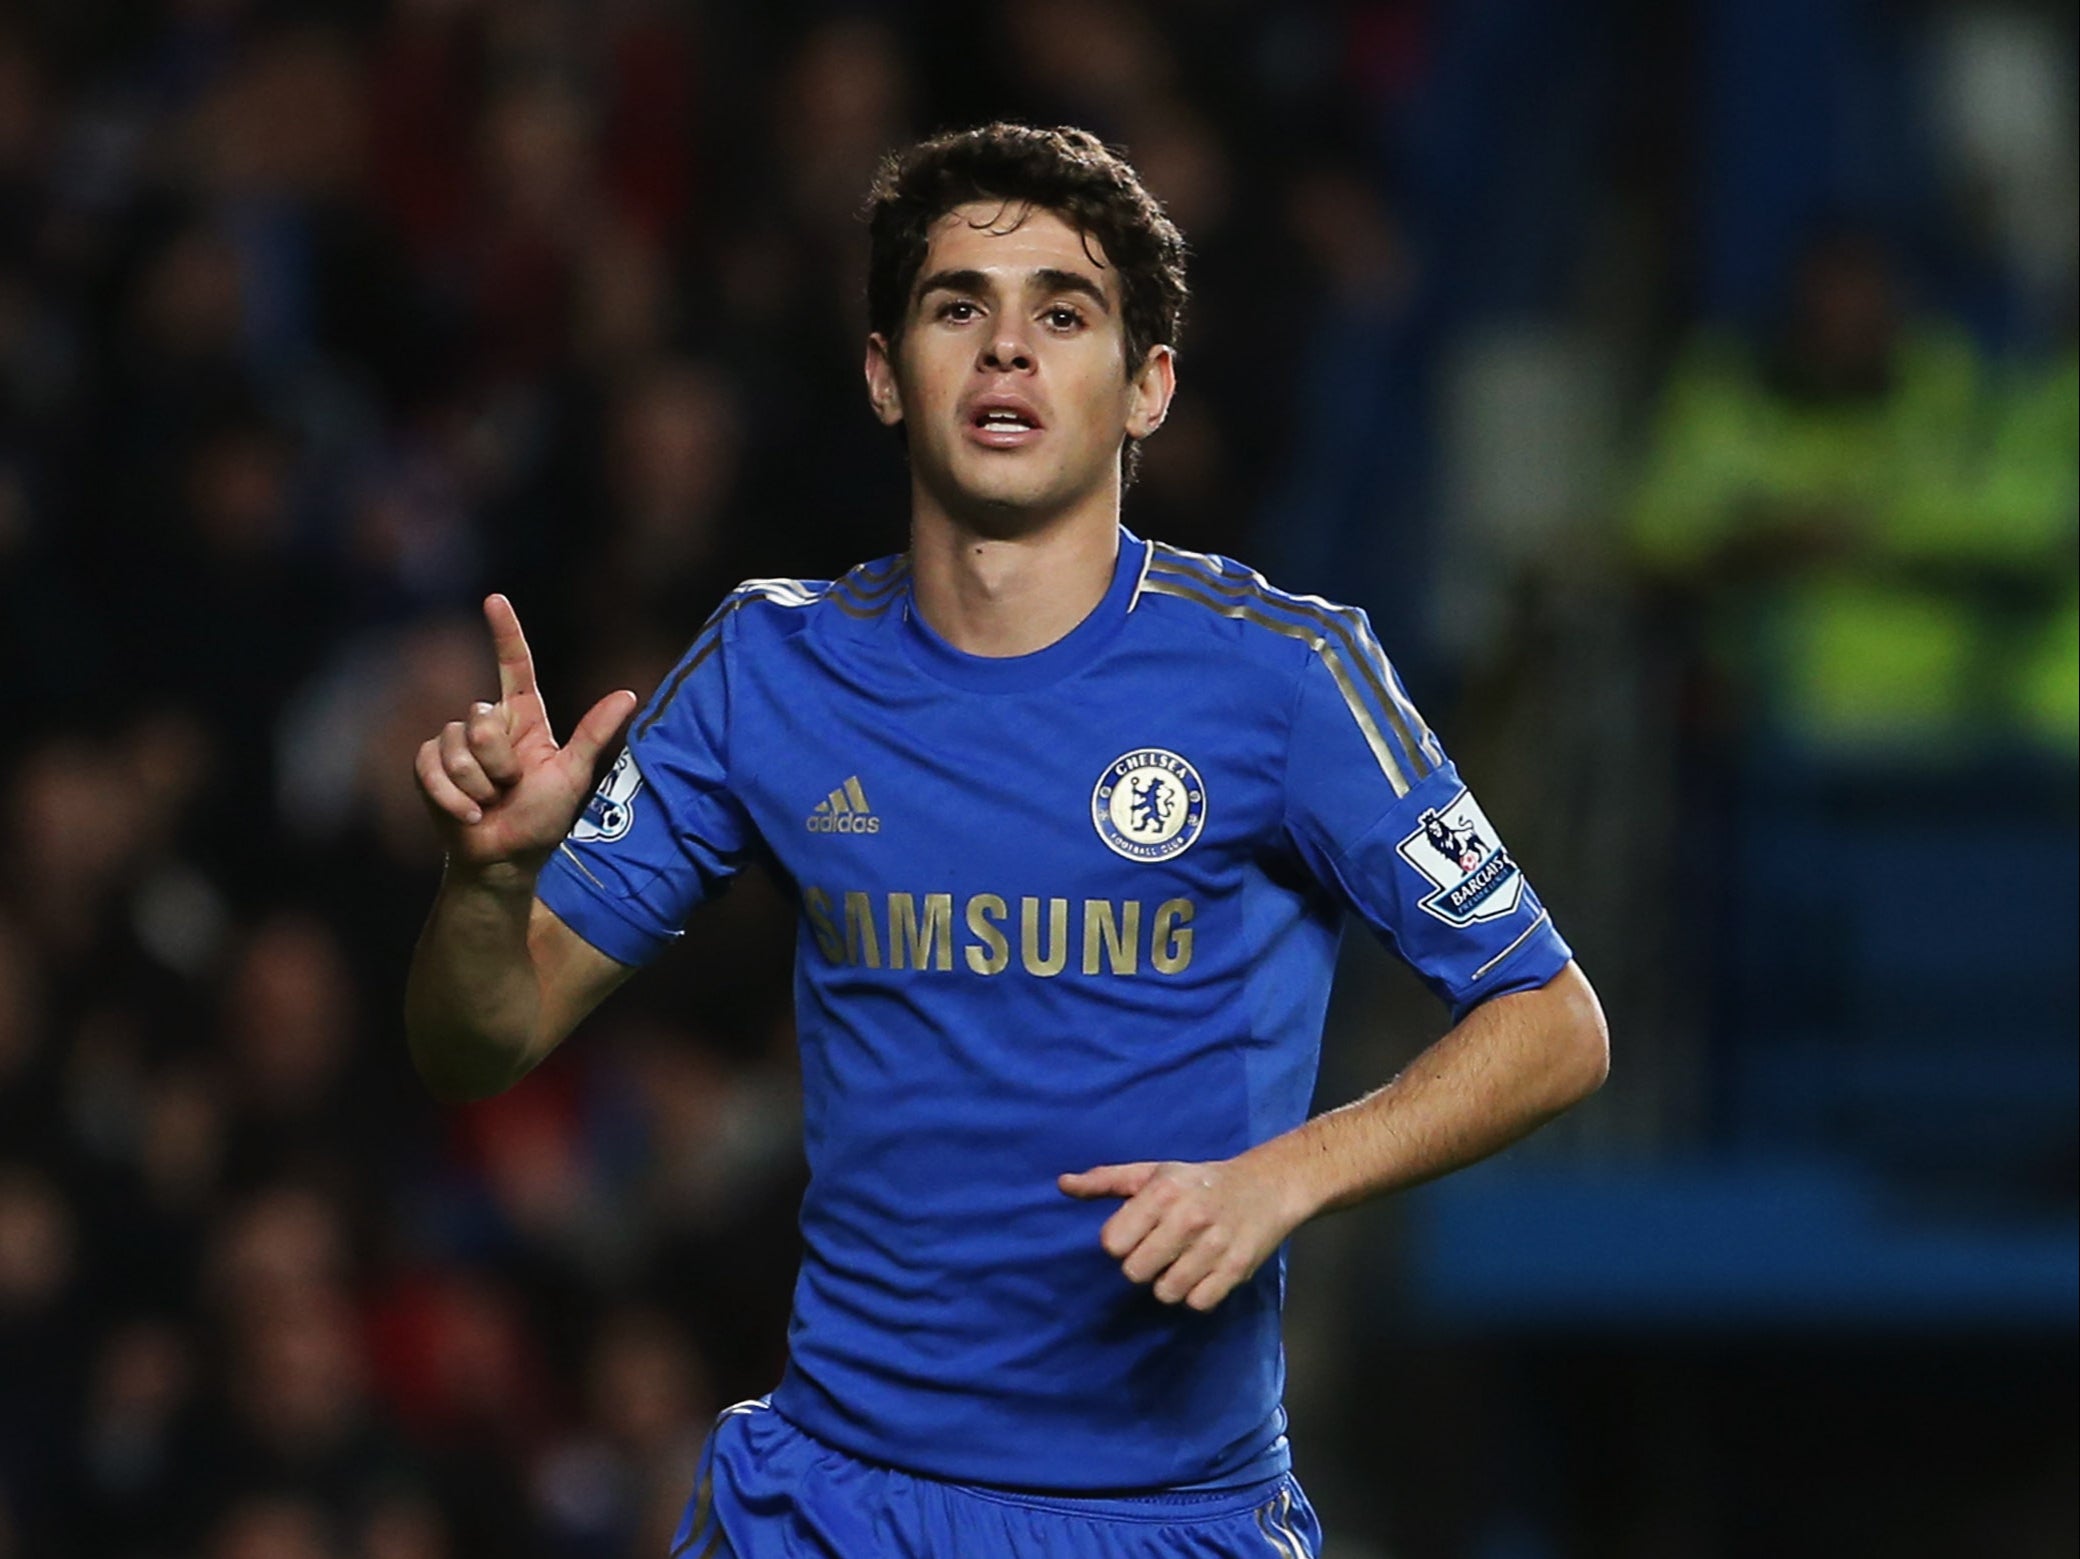 Oscar during his time at Chelsea